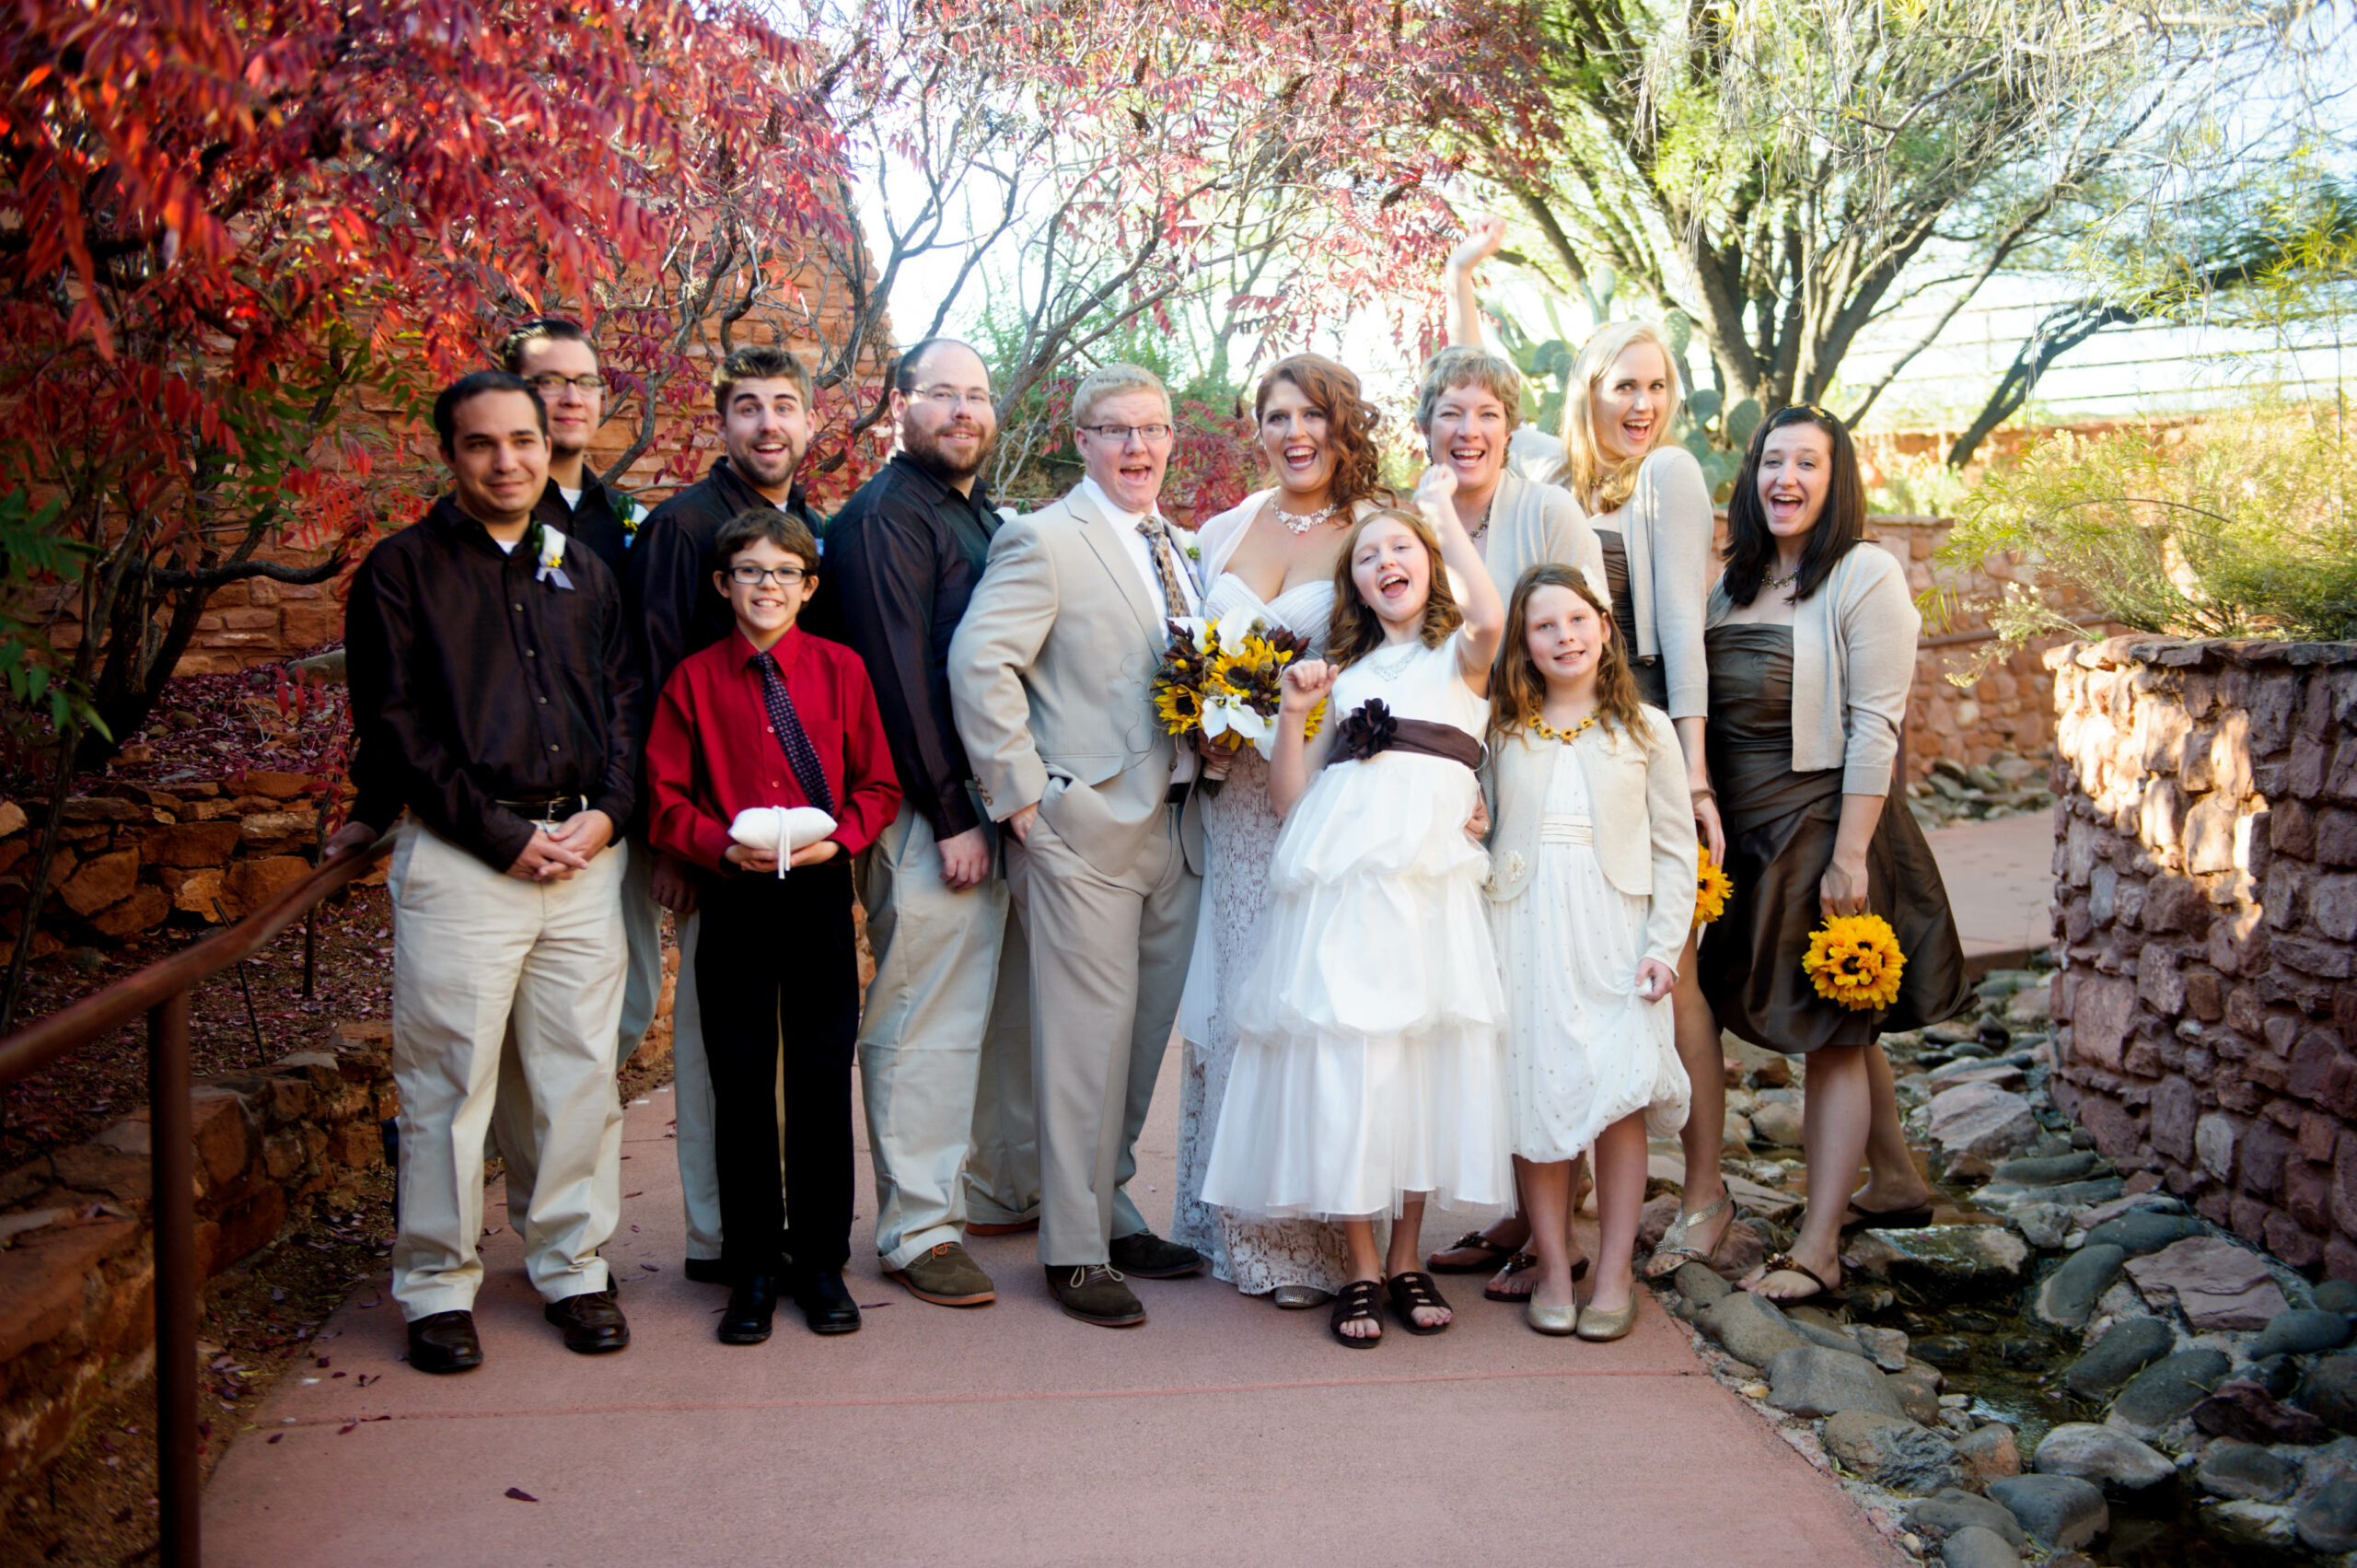 A young newly wedded couple poses for a photo with flower girls, bridesmaid, and best man.